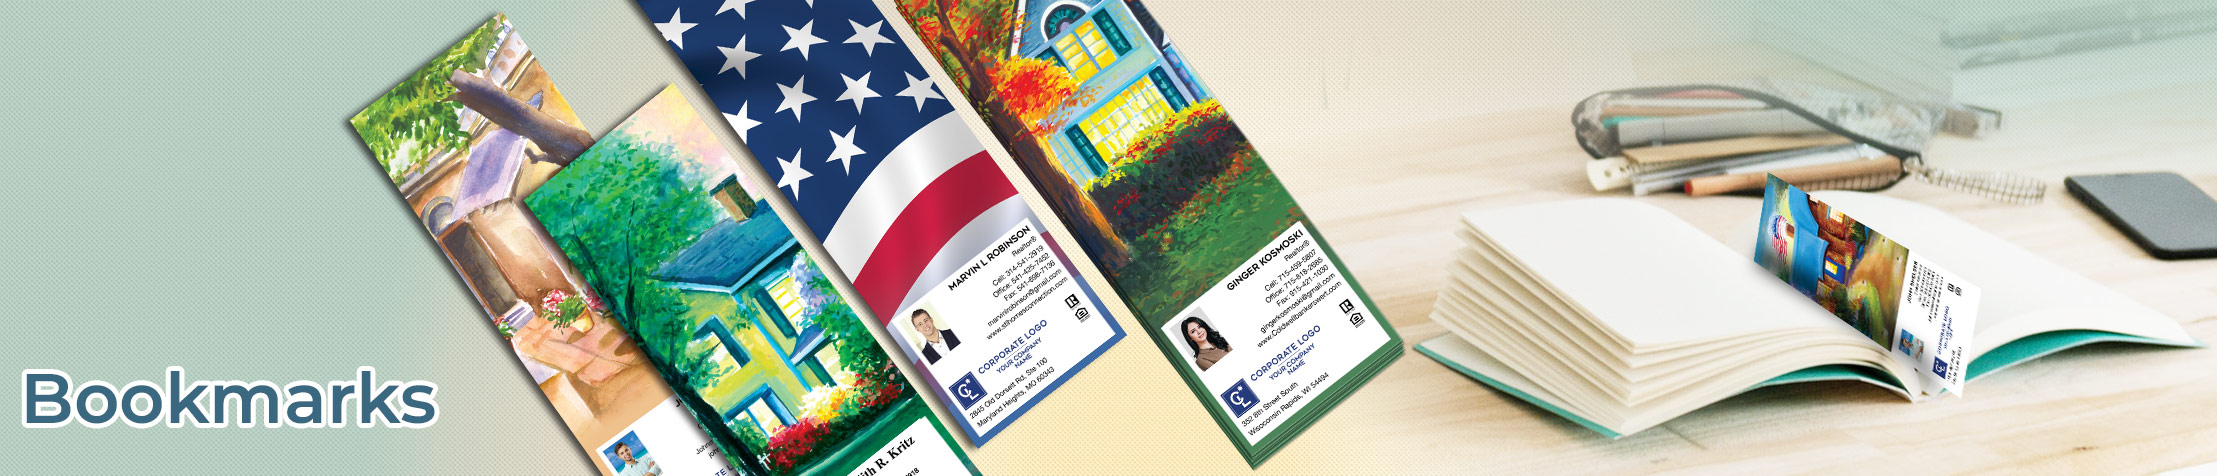 Coldwell Banker Real Estate Bookmarks - Coldwell Banker  custom realtor bookmarks | BestPrintBuy.com